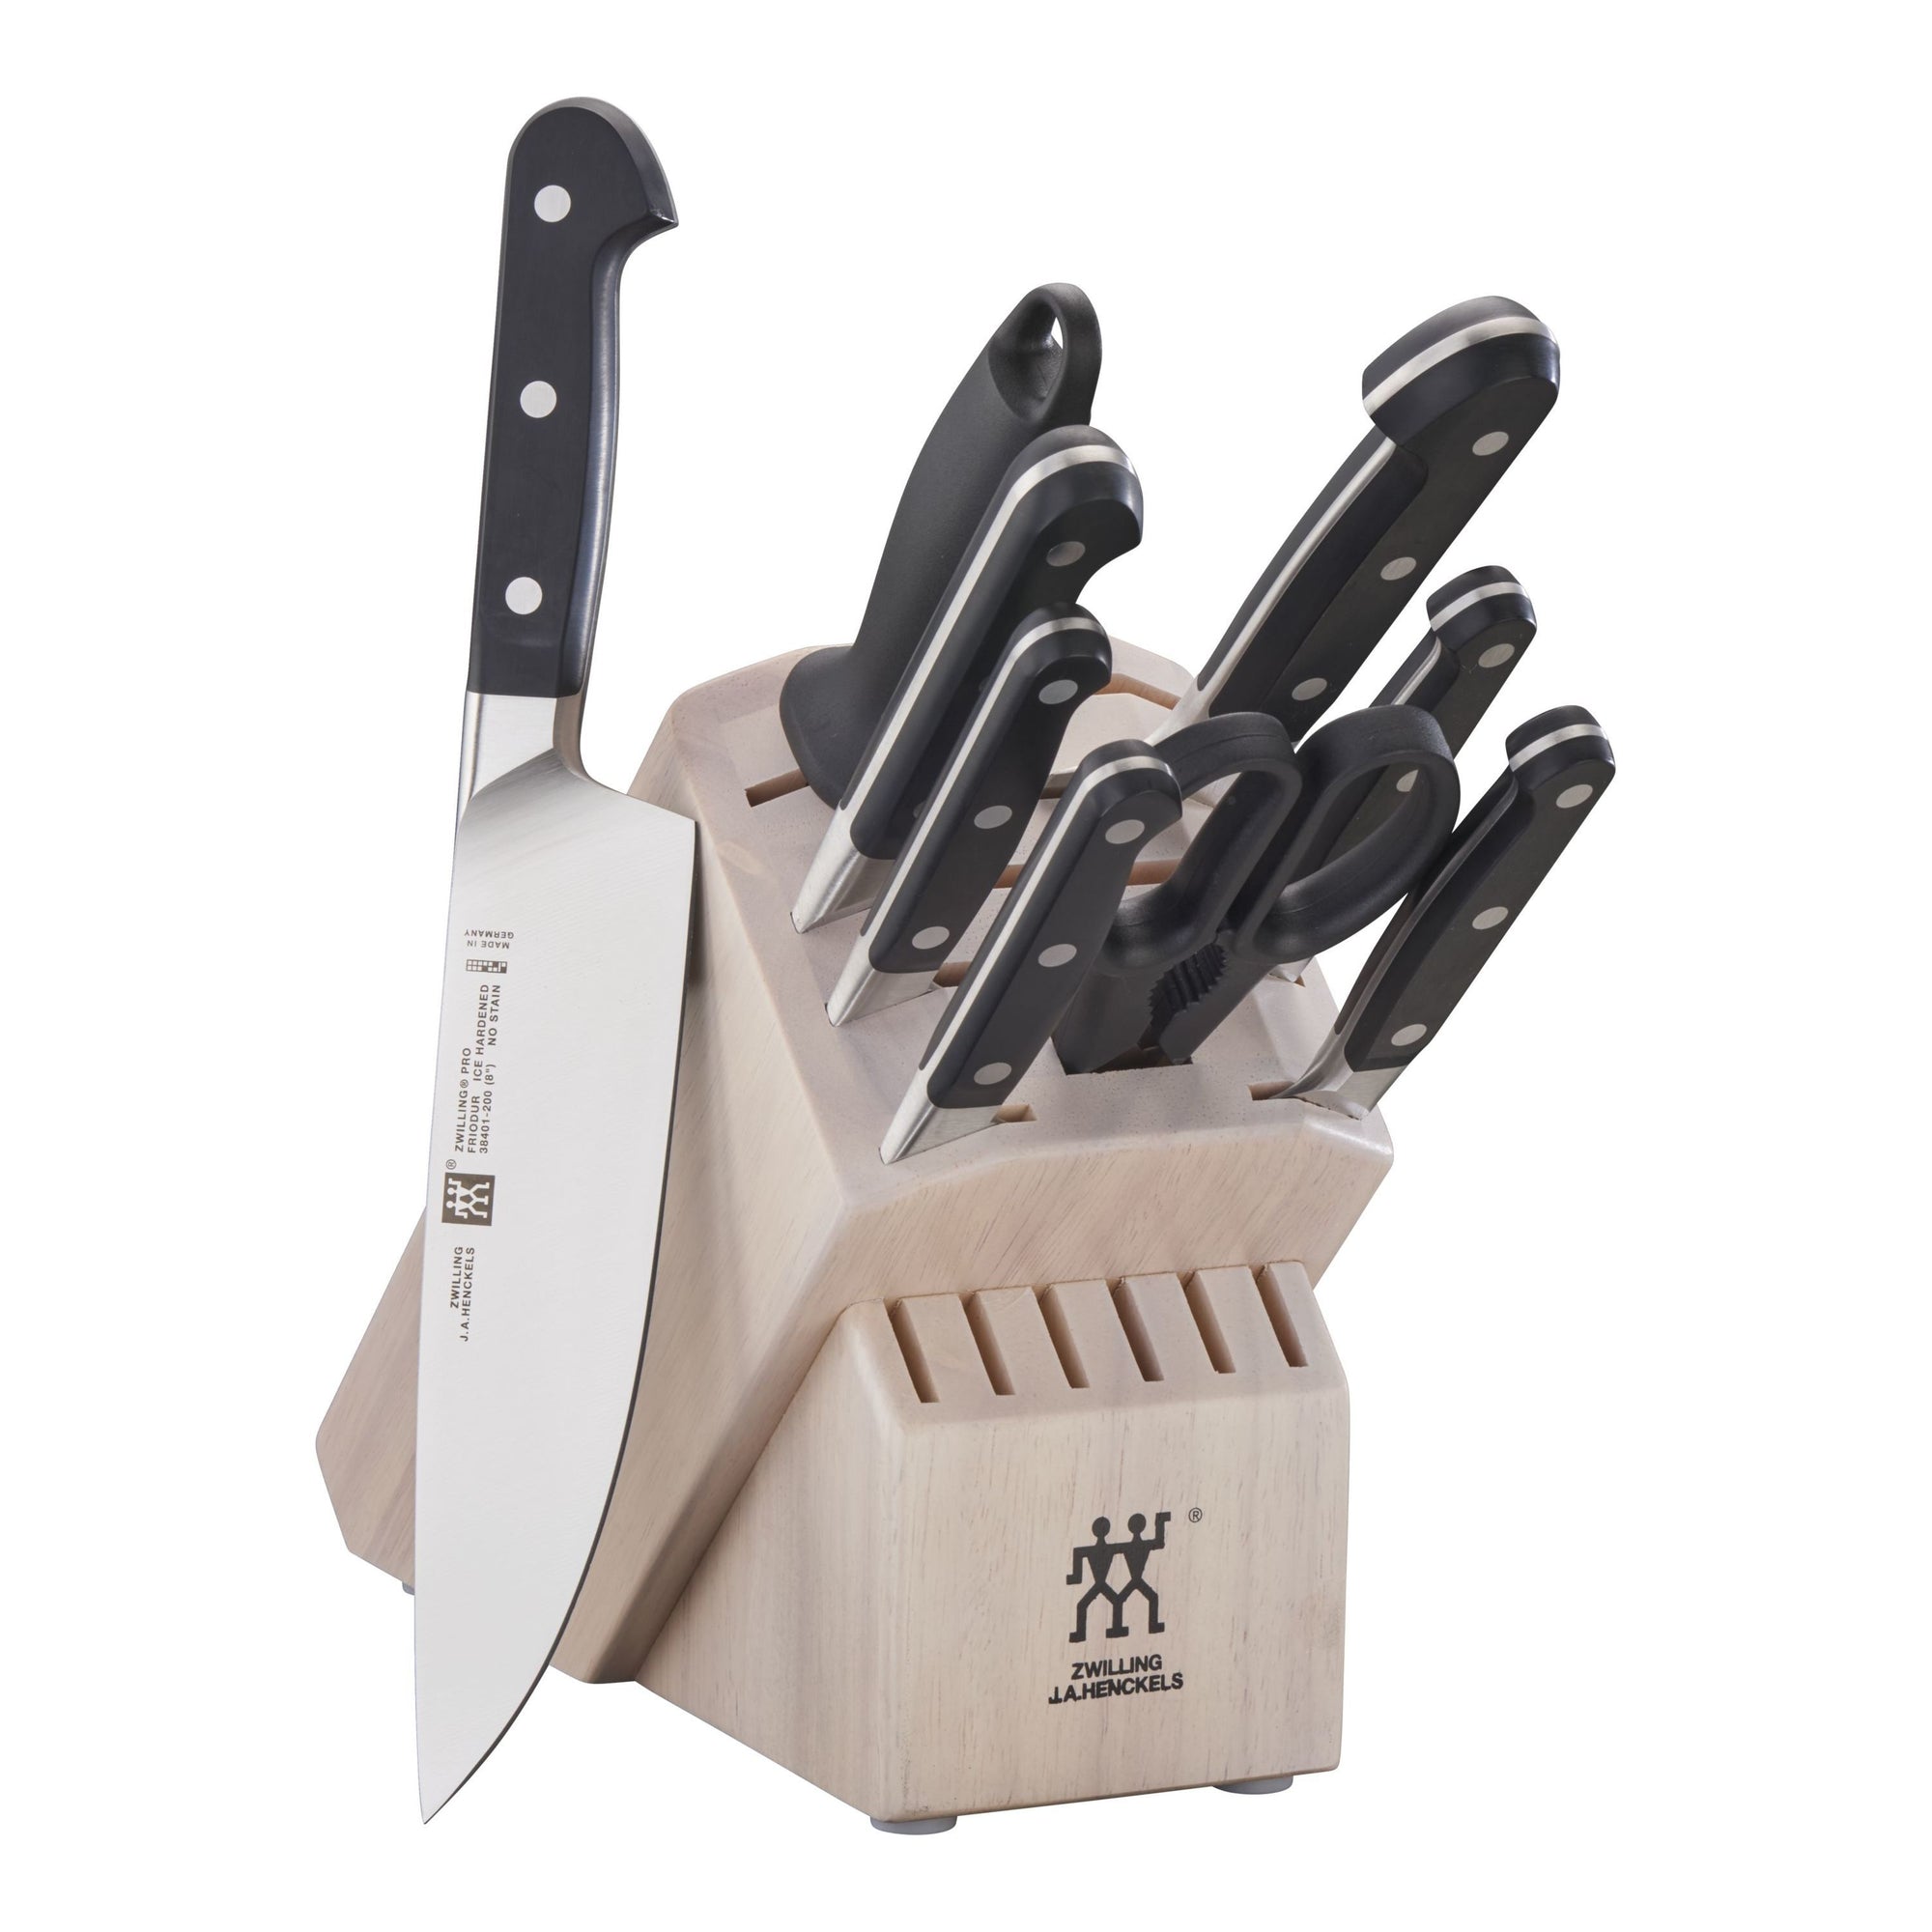 ZWILLING 10pc Knife Set in Solid White Rubberwood Block, Pro Series